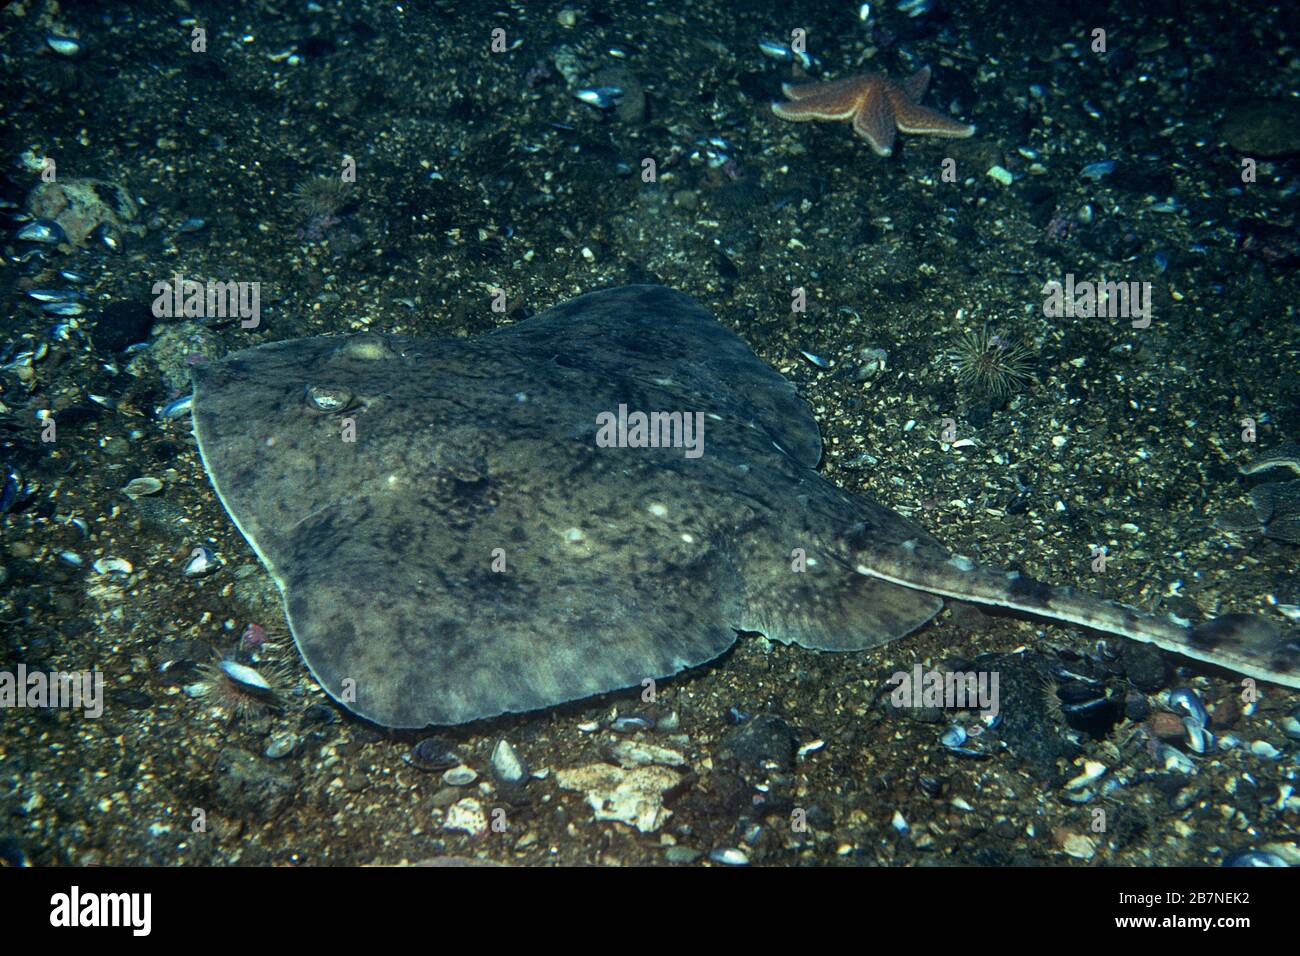 Thorny Skate underwater in the St. Lawrence River in Canada Stock Photo